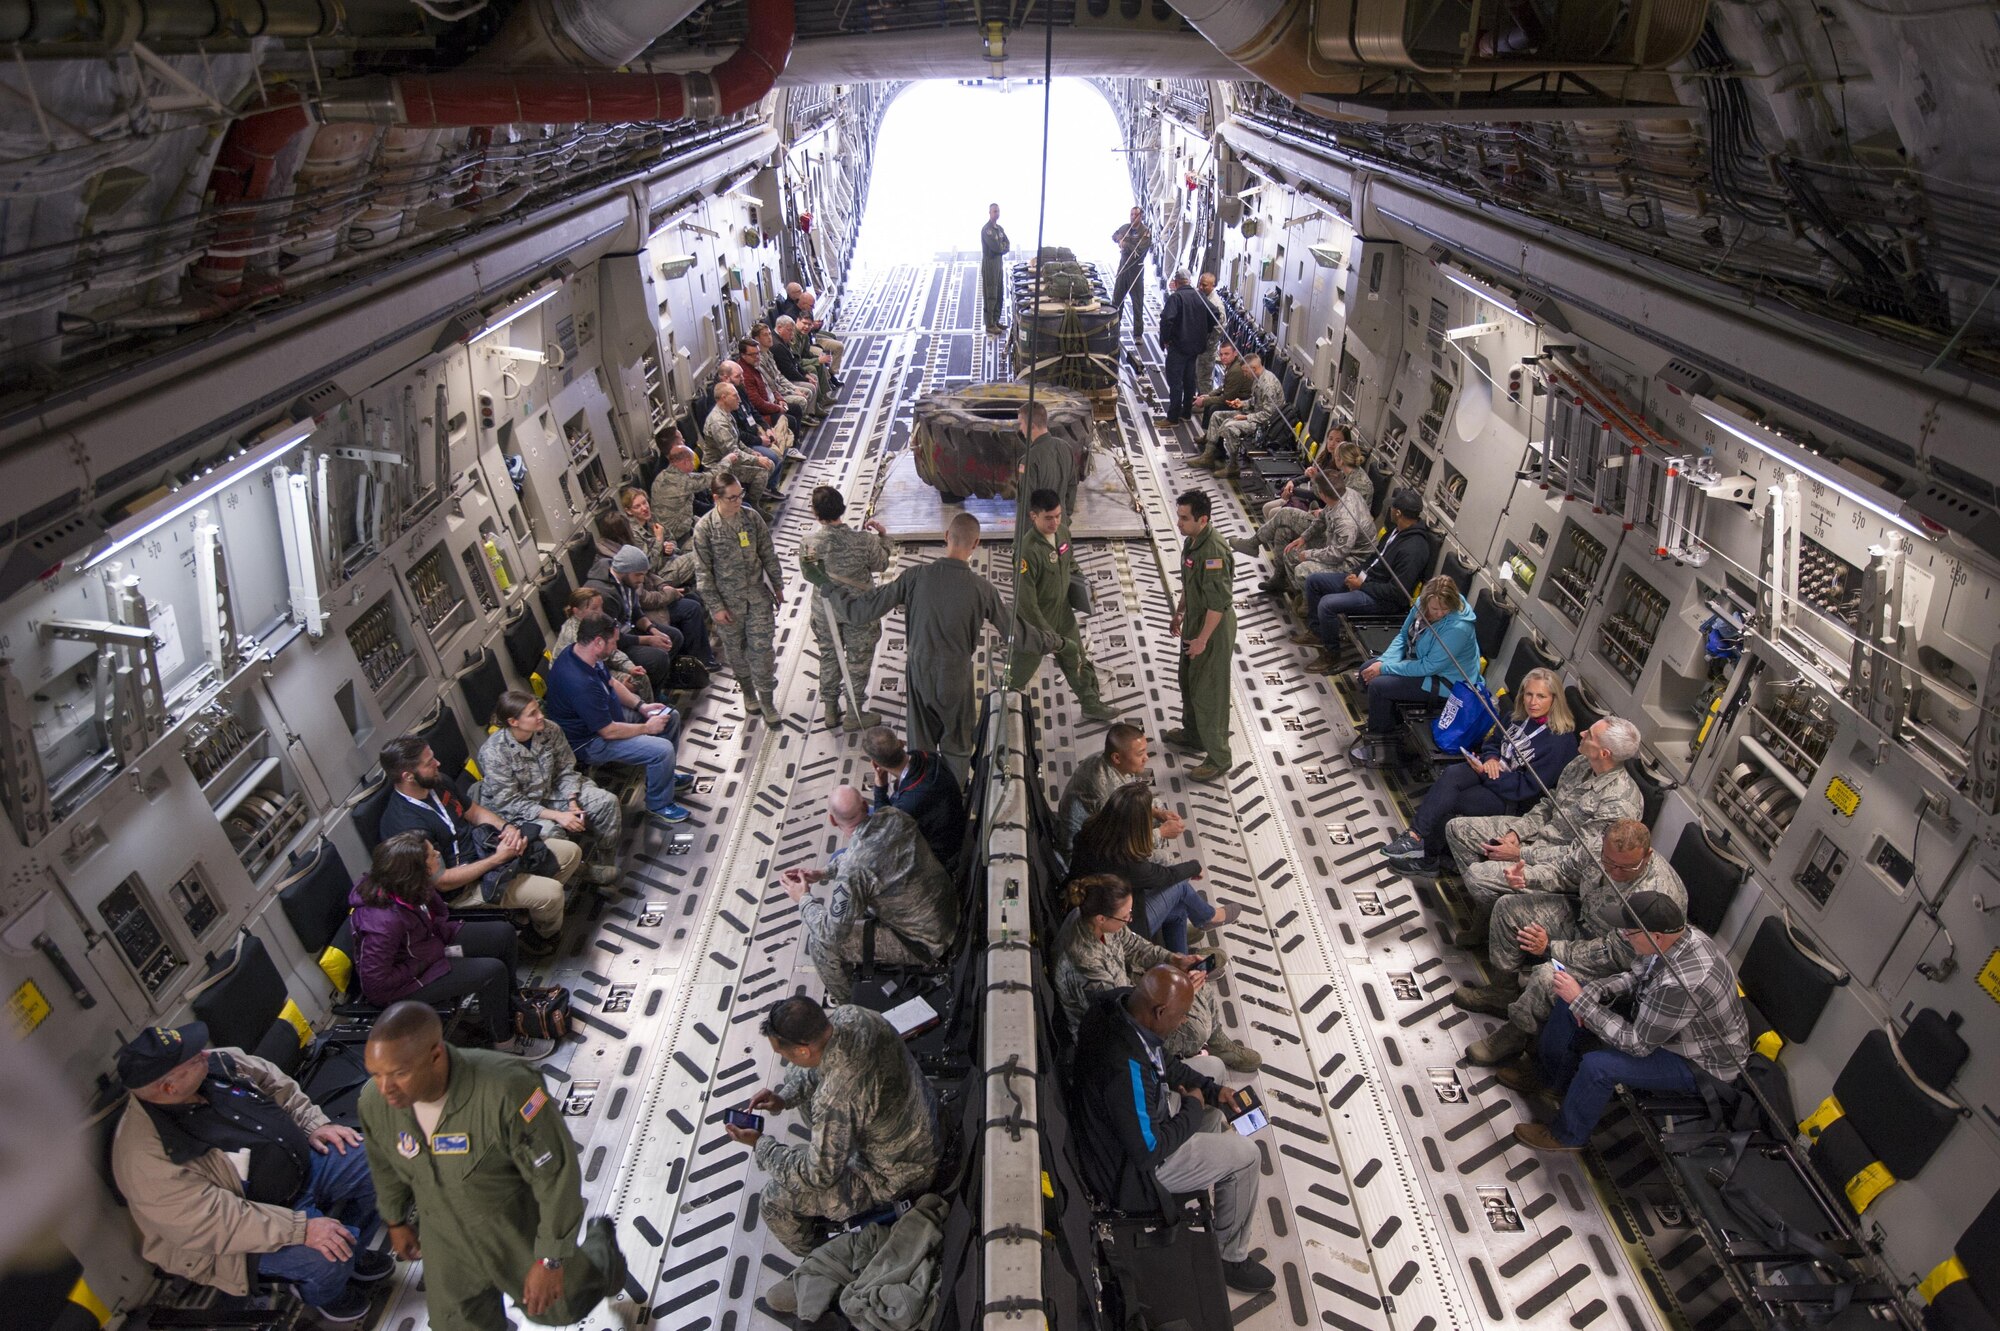 Civilian employers and their reservists sit aboard a C-17 Globemaster III at McChord Field June 3, 2017, while the air crew prep the airplane for take-off during Employer Orientation Day. Reservists invited their employers out for a day to learn and experience life in the Air Force Reserve. Employers went through a deployment processing line and took part in a training flight aboard a C-17 Globemaster III, which included an airdrop. (U.S. Air Force photo by Tech. Sgt. Bryan Hull)